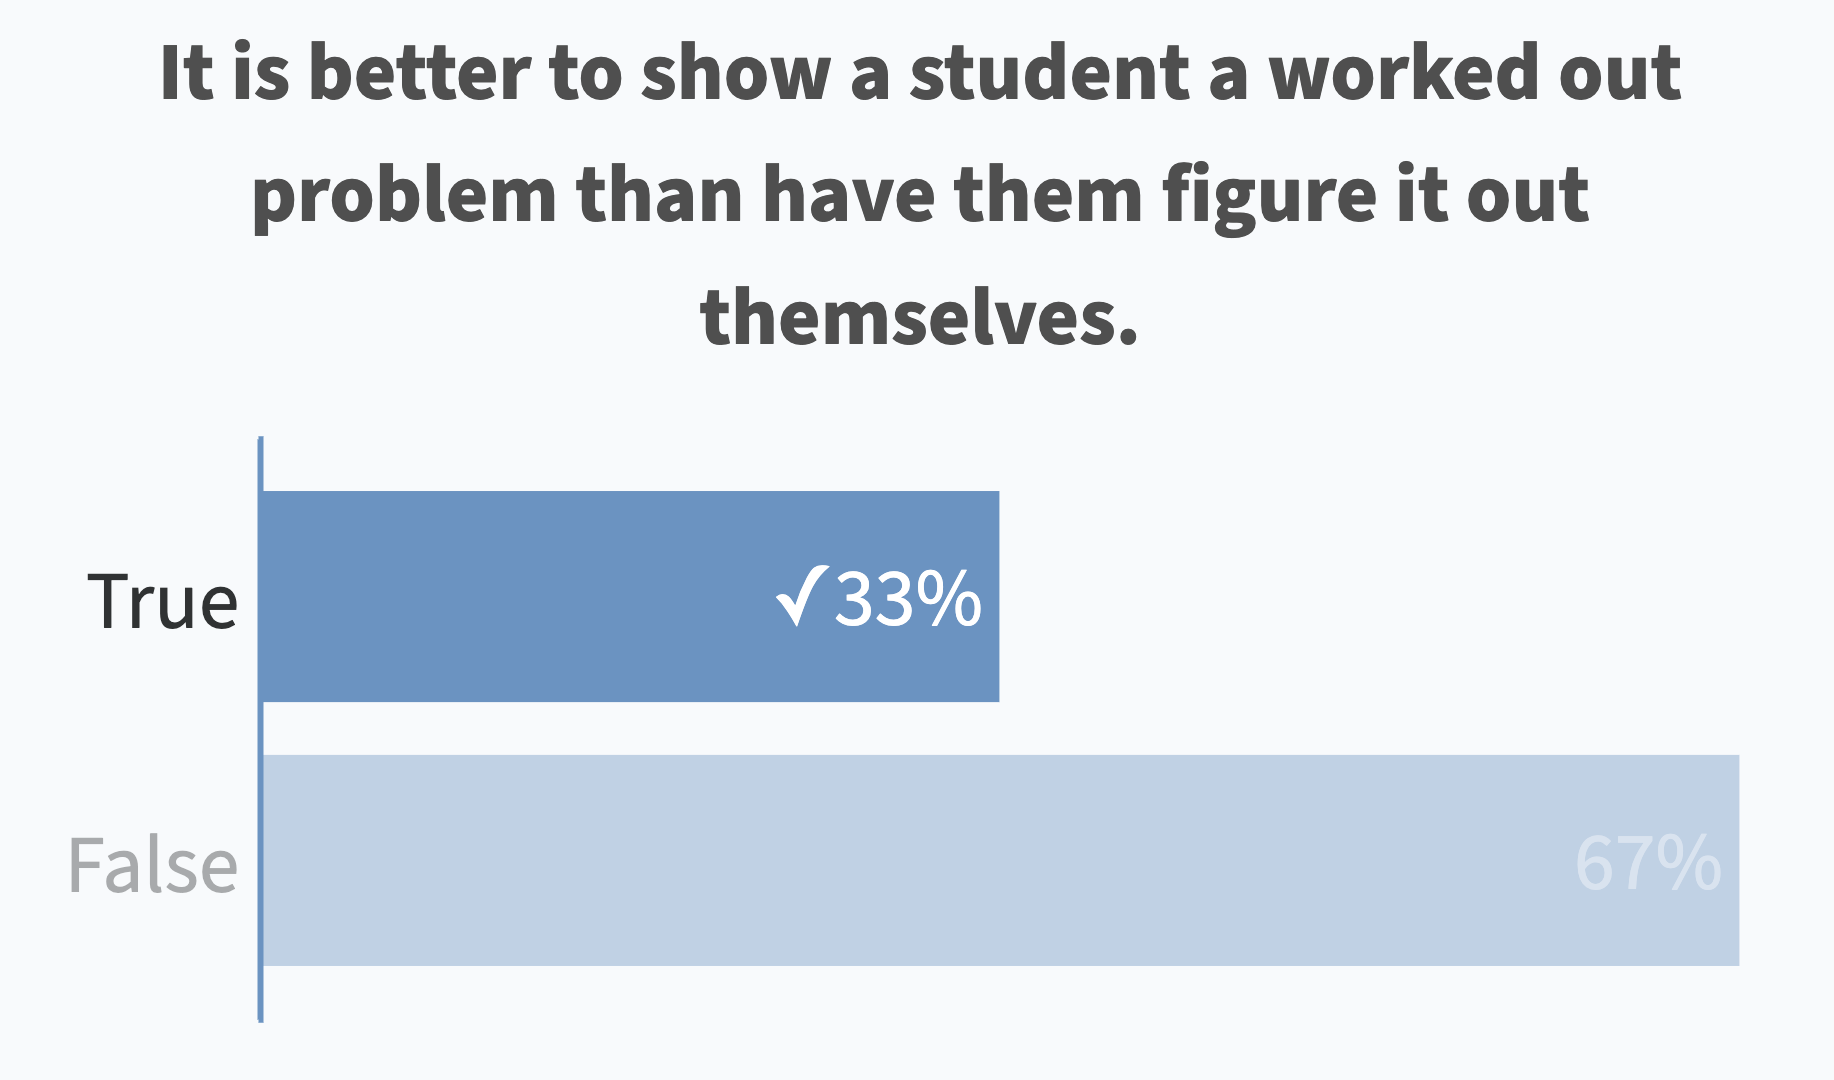 It is better to show a student a worked out problem than have them figure it out themselves.